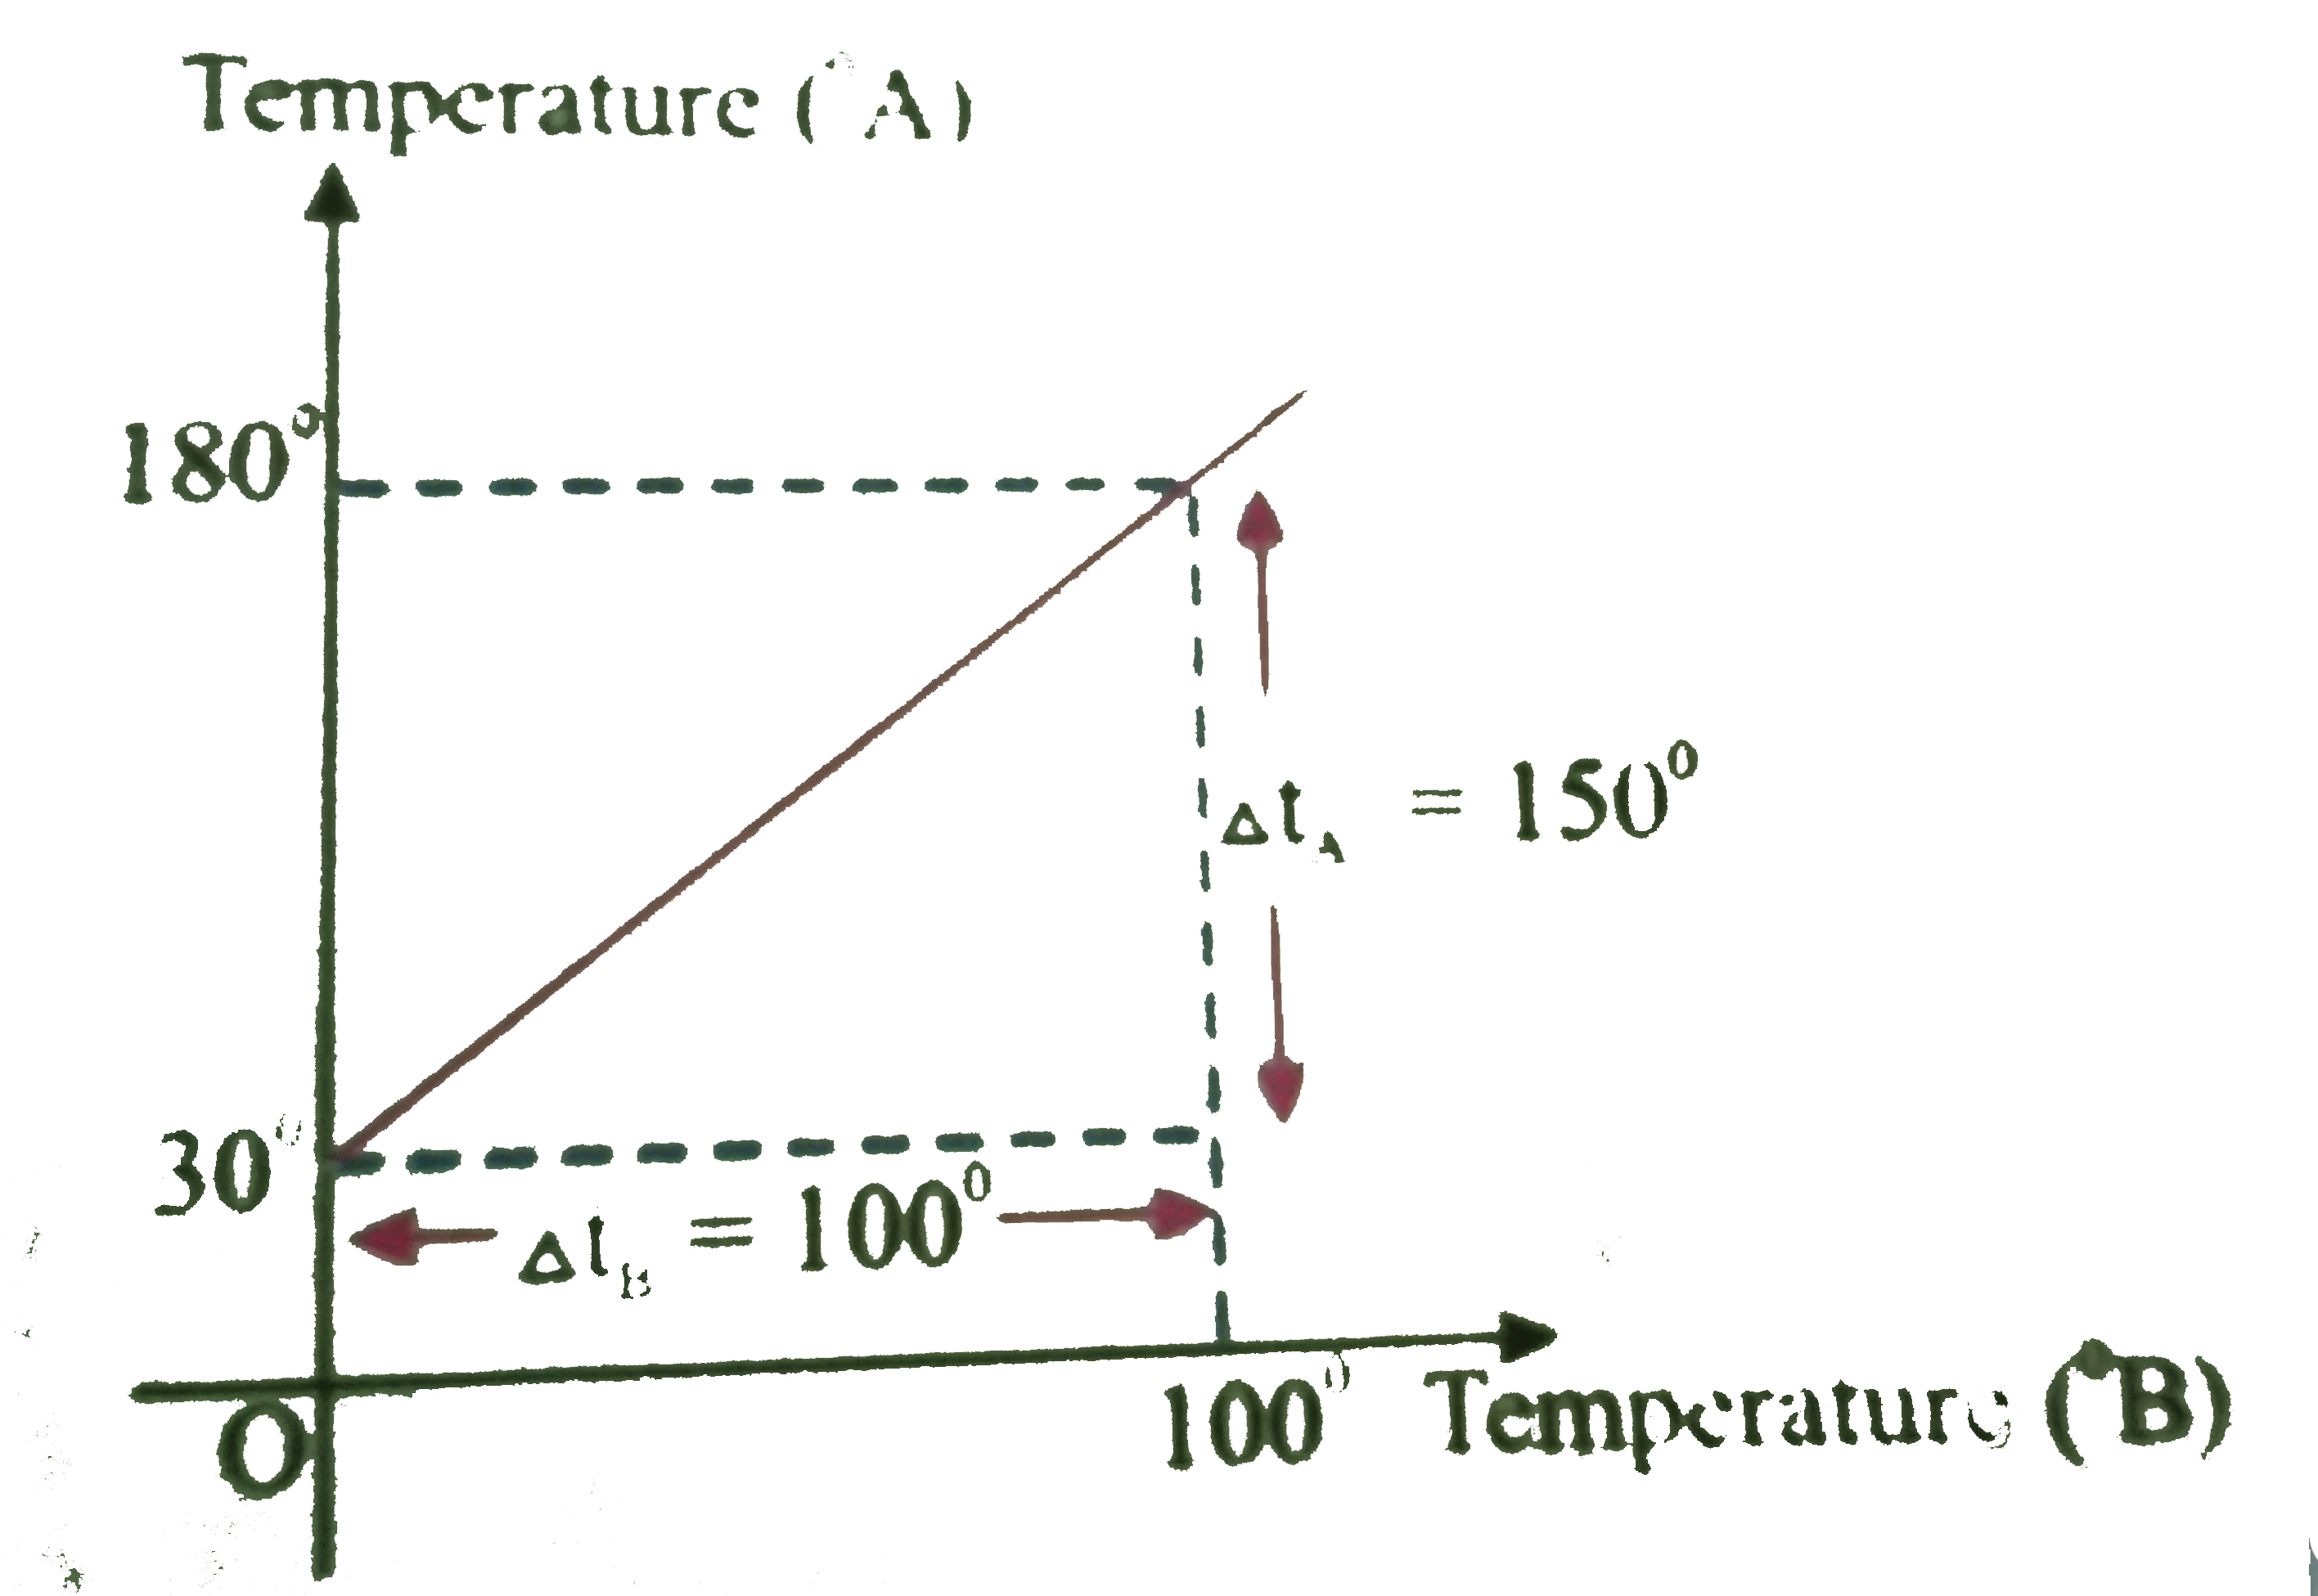 The graph between two temperature scales A and B is shown in Fig. Between upper fixed point and lower fixed point there are 150 equal divisions on scales A and 100 on scale B. The relation between the temperature in two scales is given by